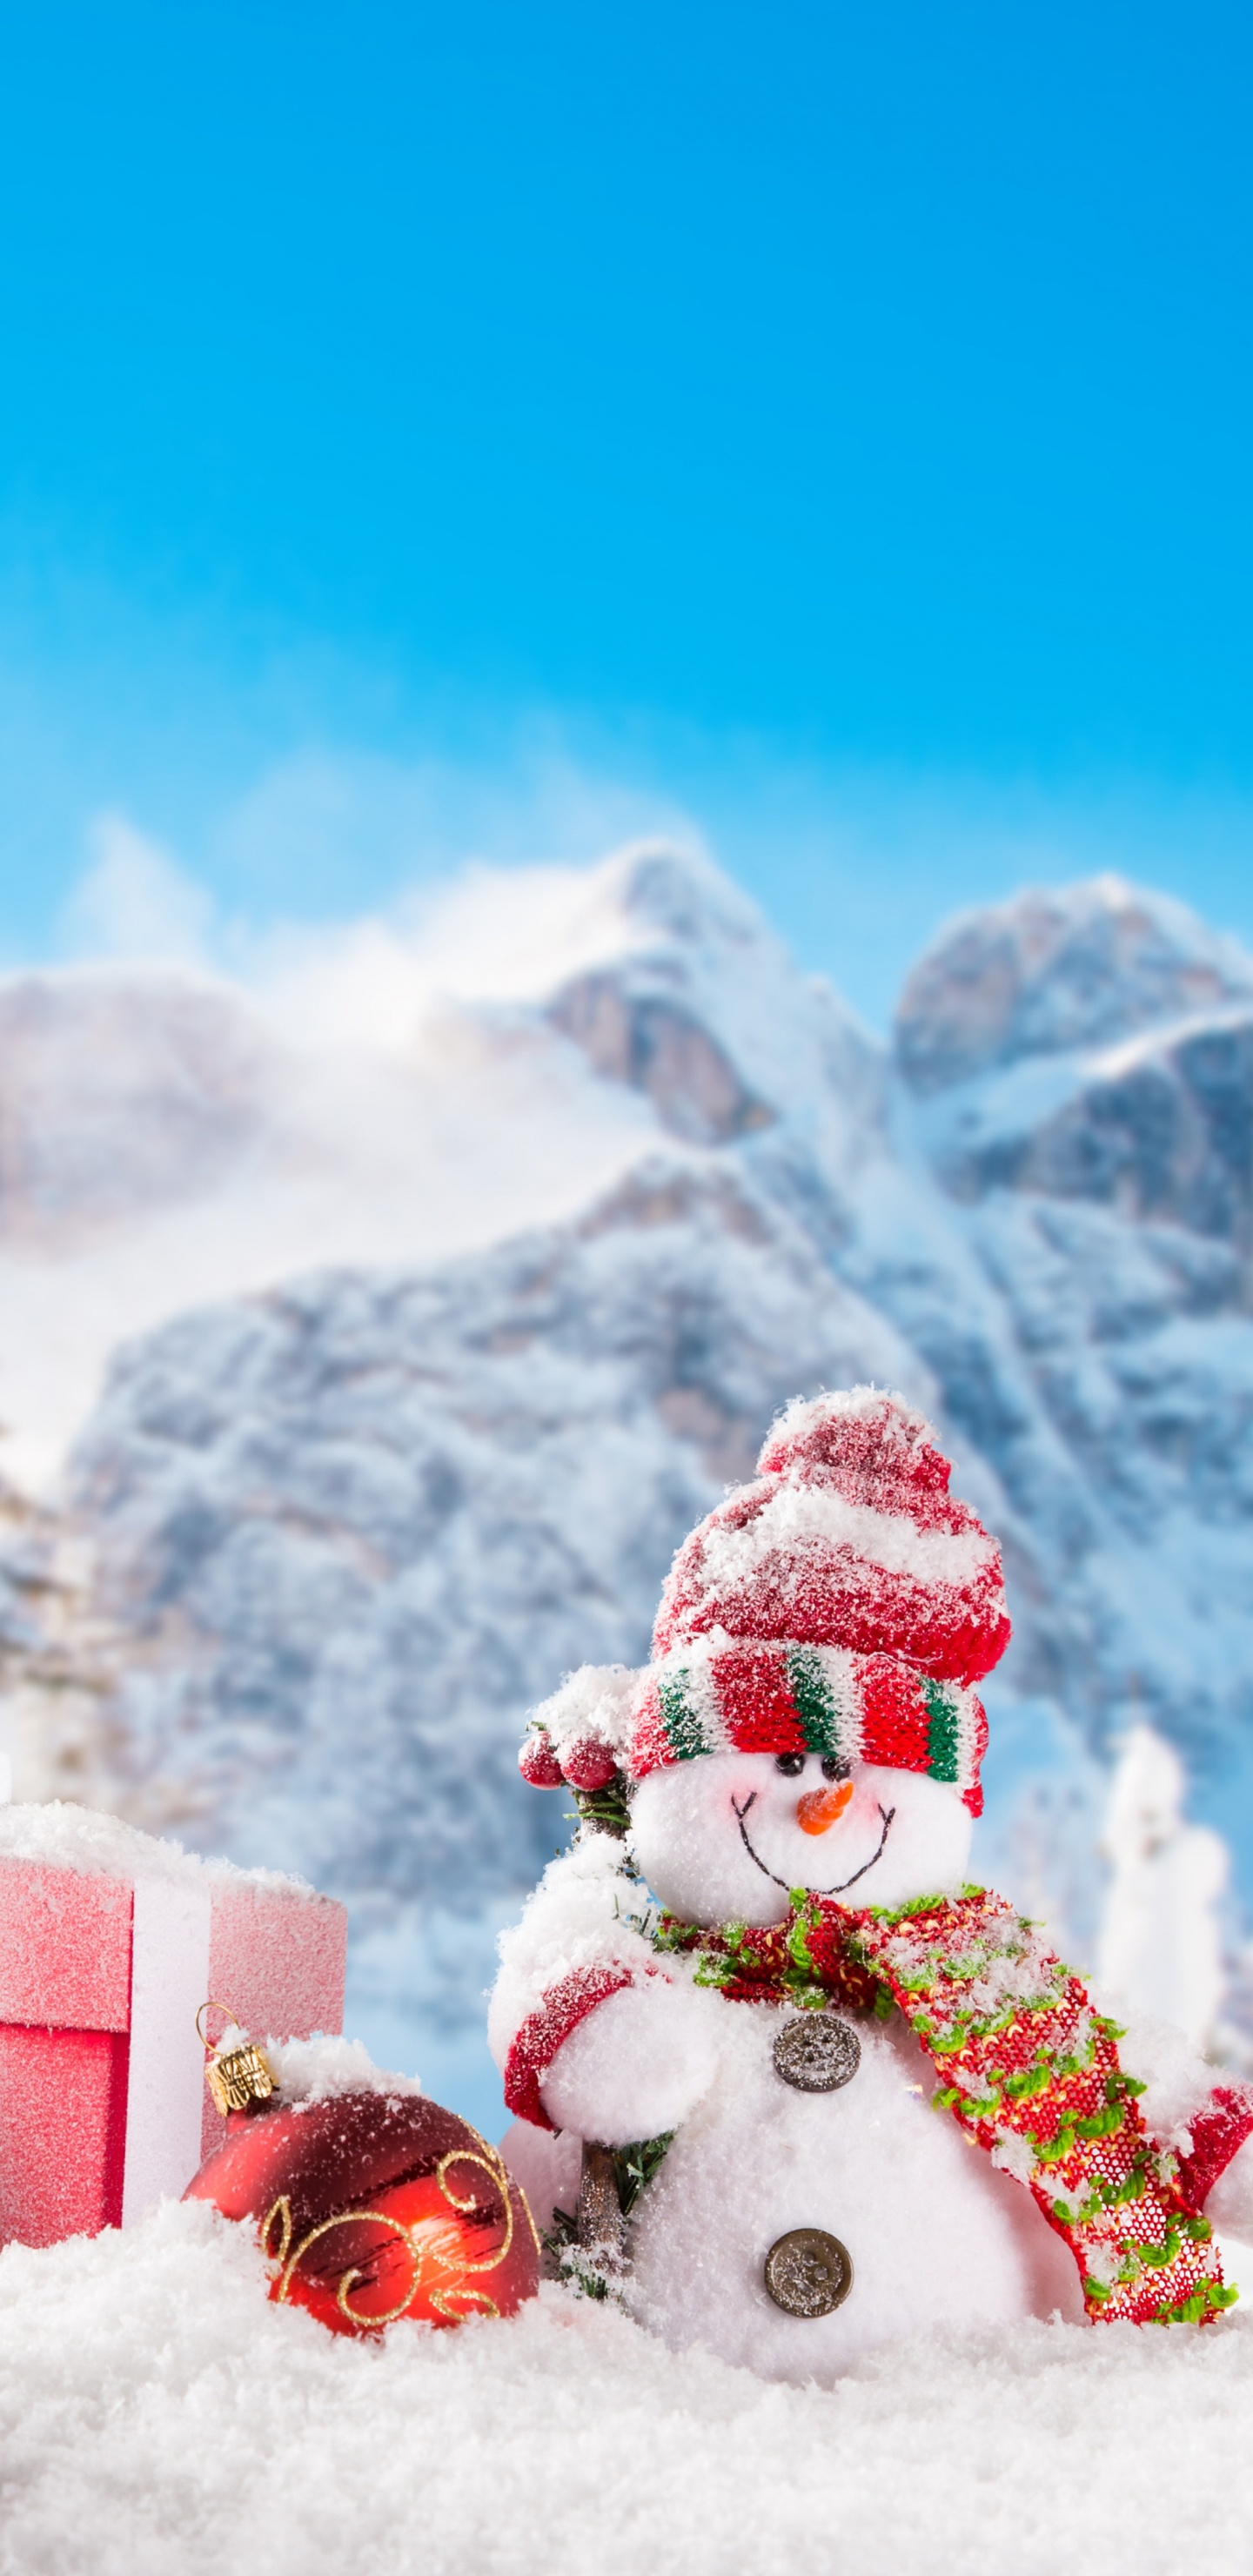 Red and White Santa Claus on Snow Covered Ground During Daytime. Wallpaper in 1440x2960 Resolution